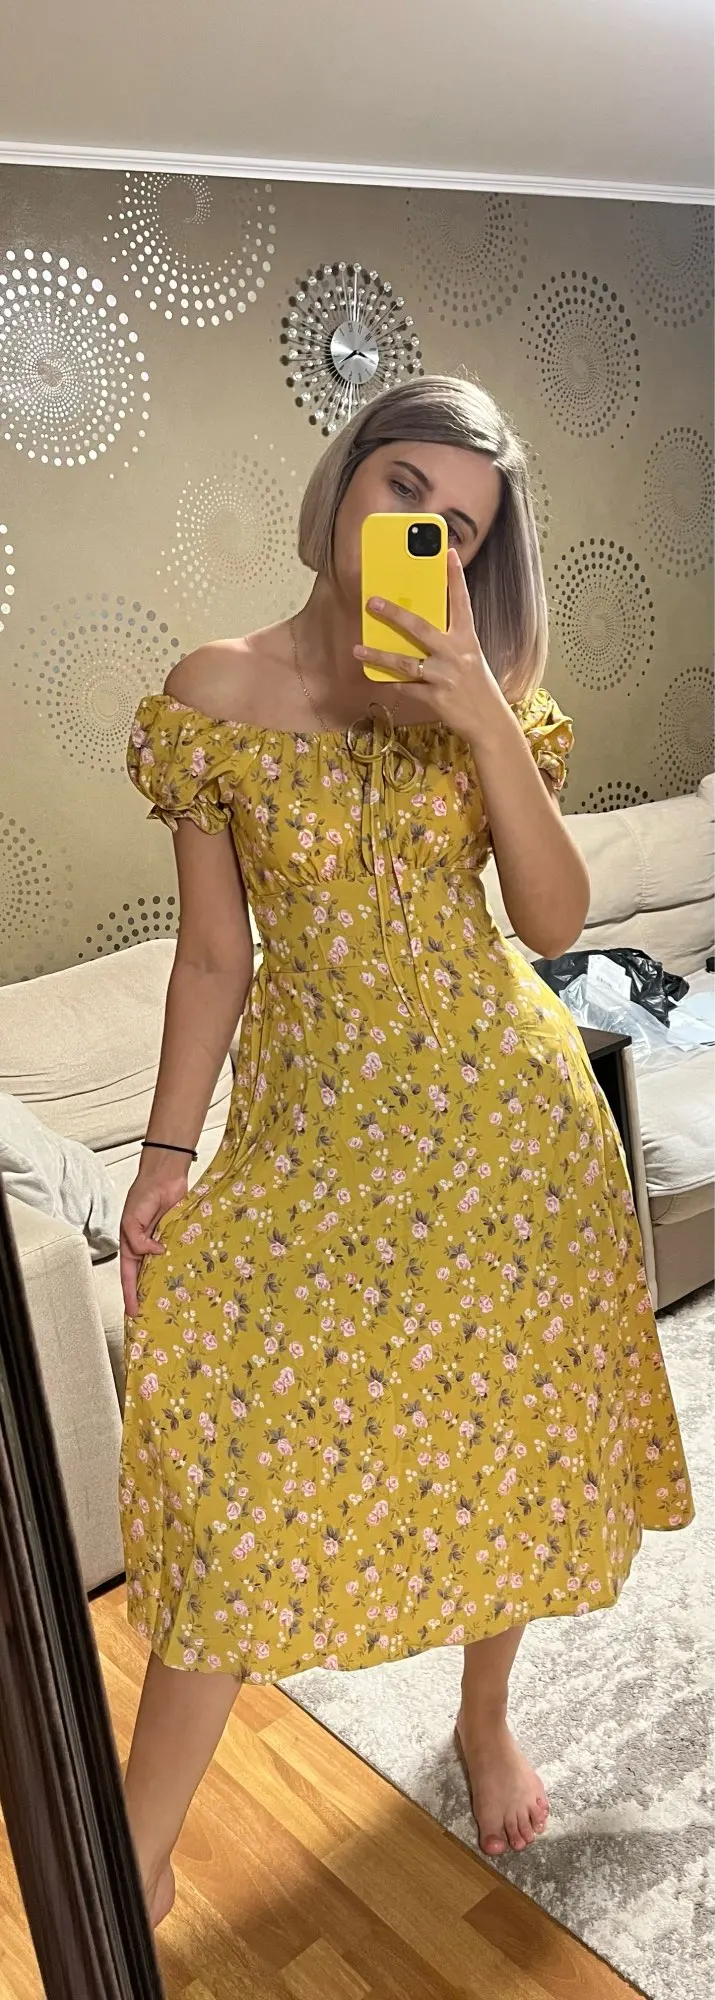 Sing Reinforced French Floral Summer Dress for Women,Sexy,Soft,Slash Color,Bare Shoulders,A Line A,Boho Print,Vacation,Beach,Summer |Dresses| photo review